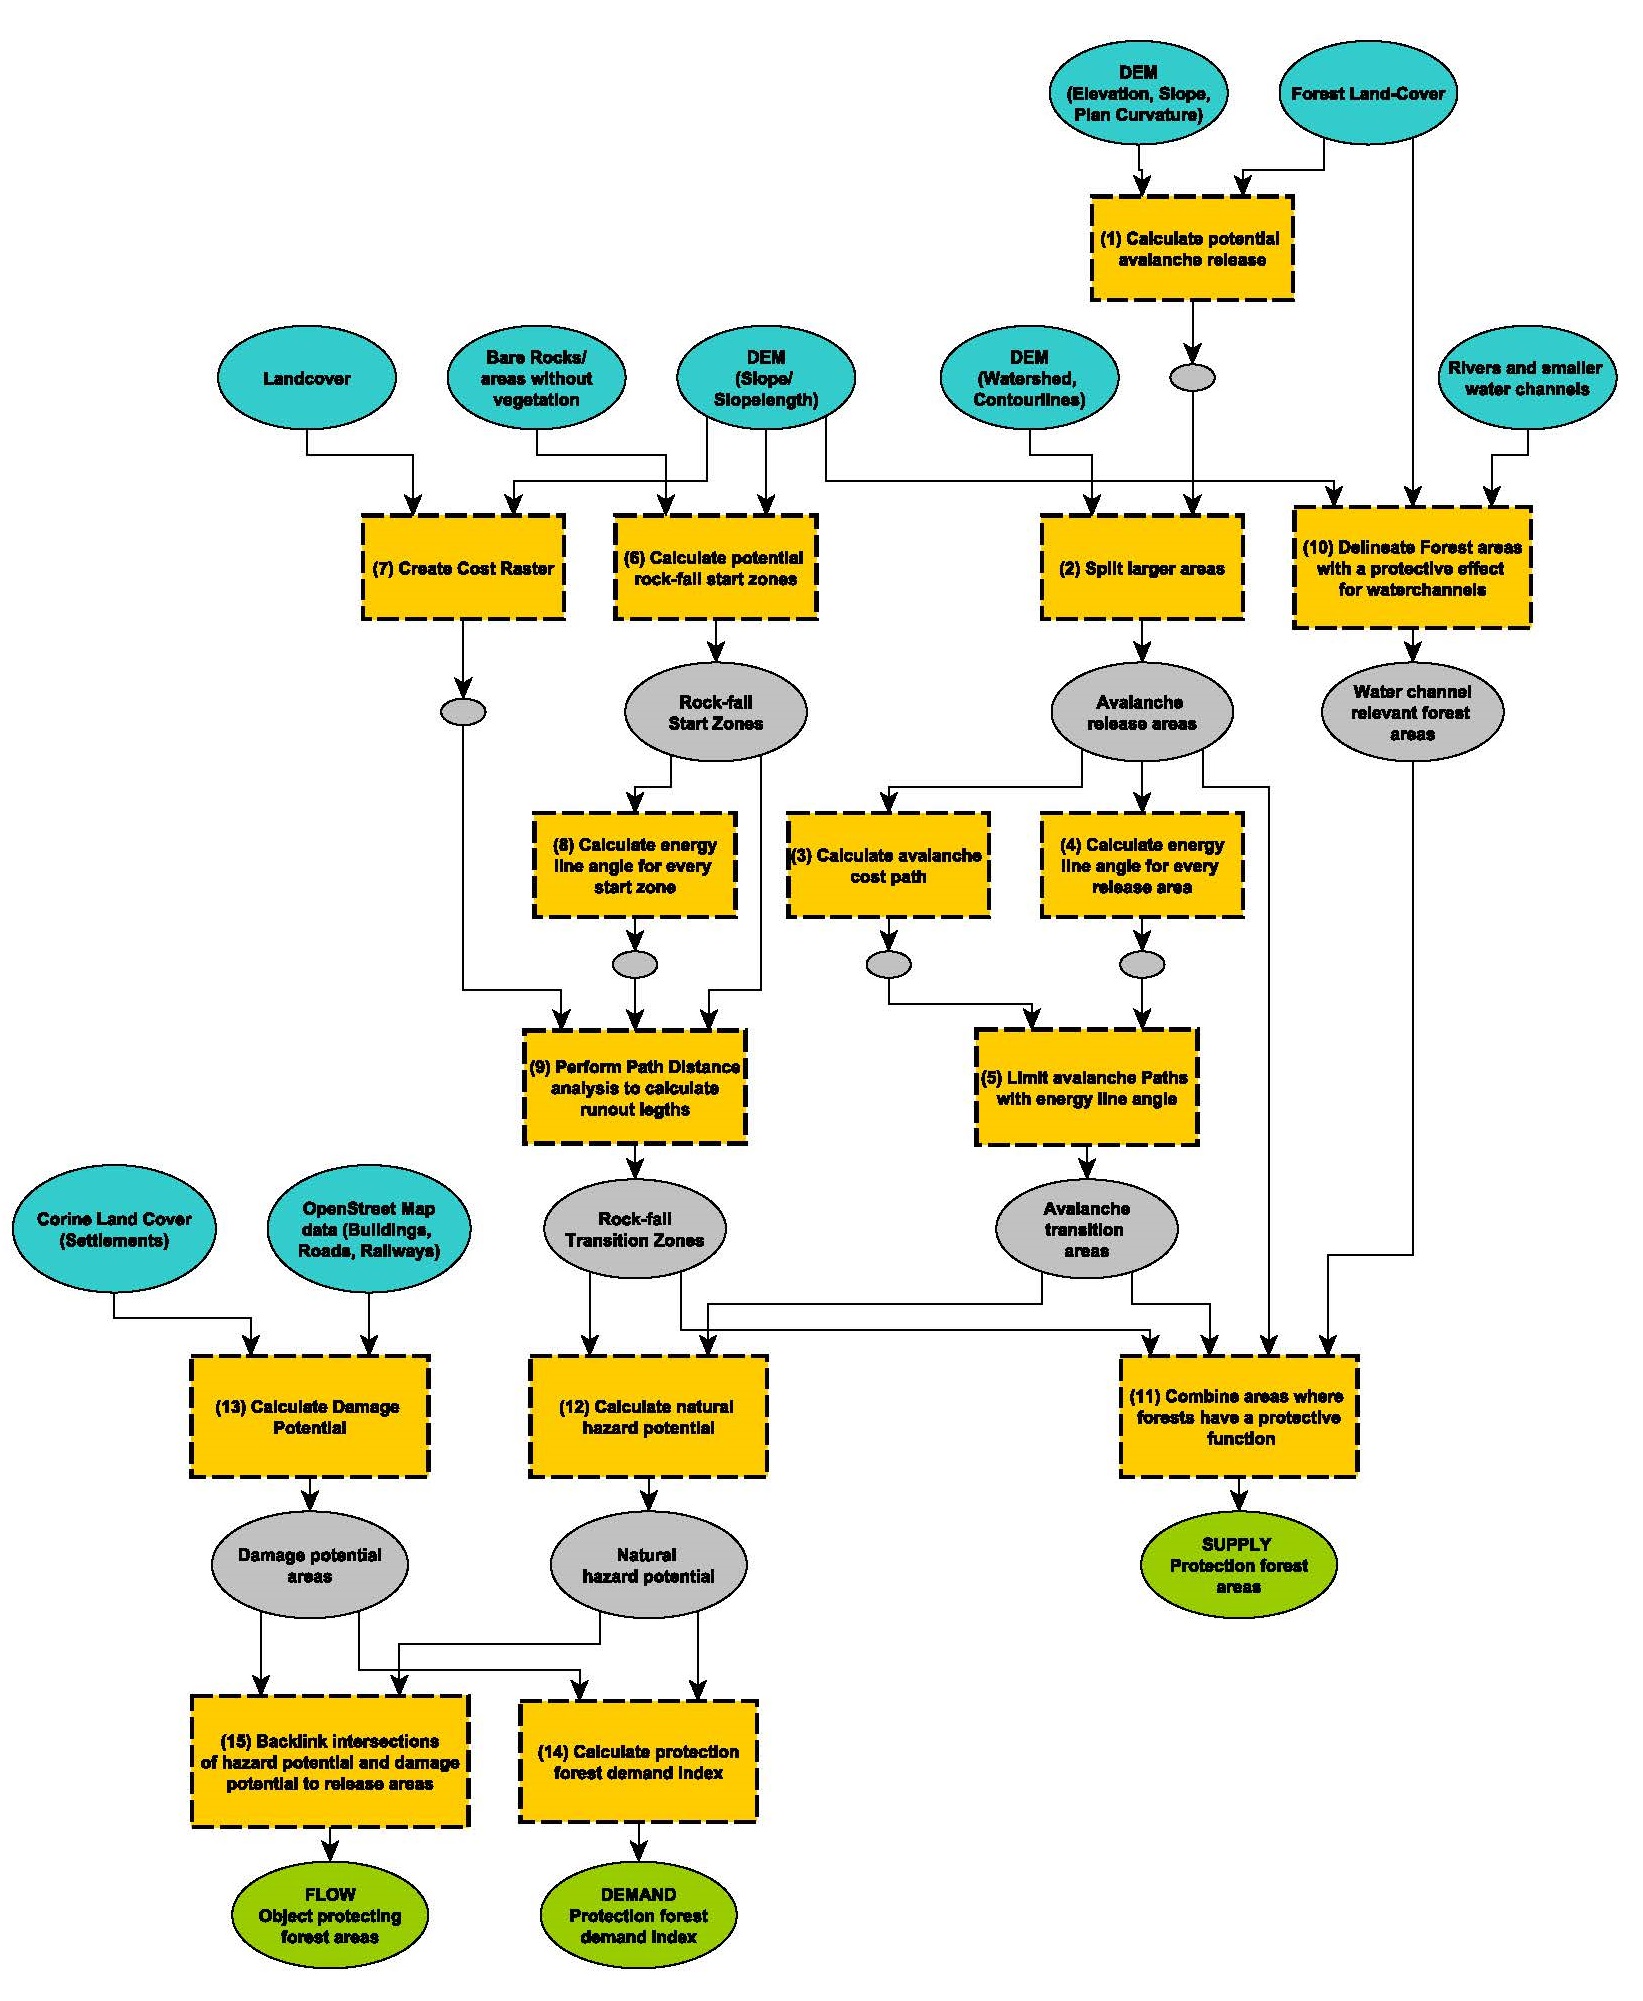 protection_forest_flowchart_f1.jpg